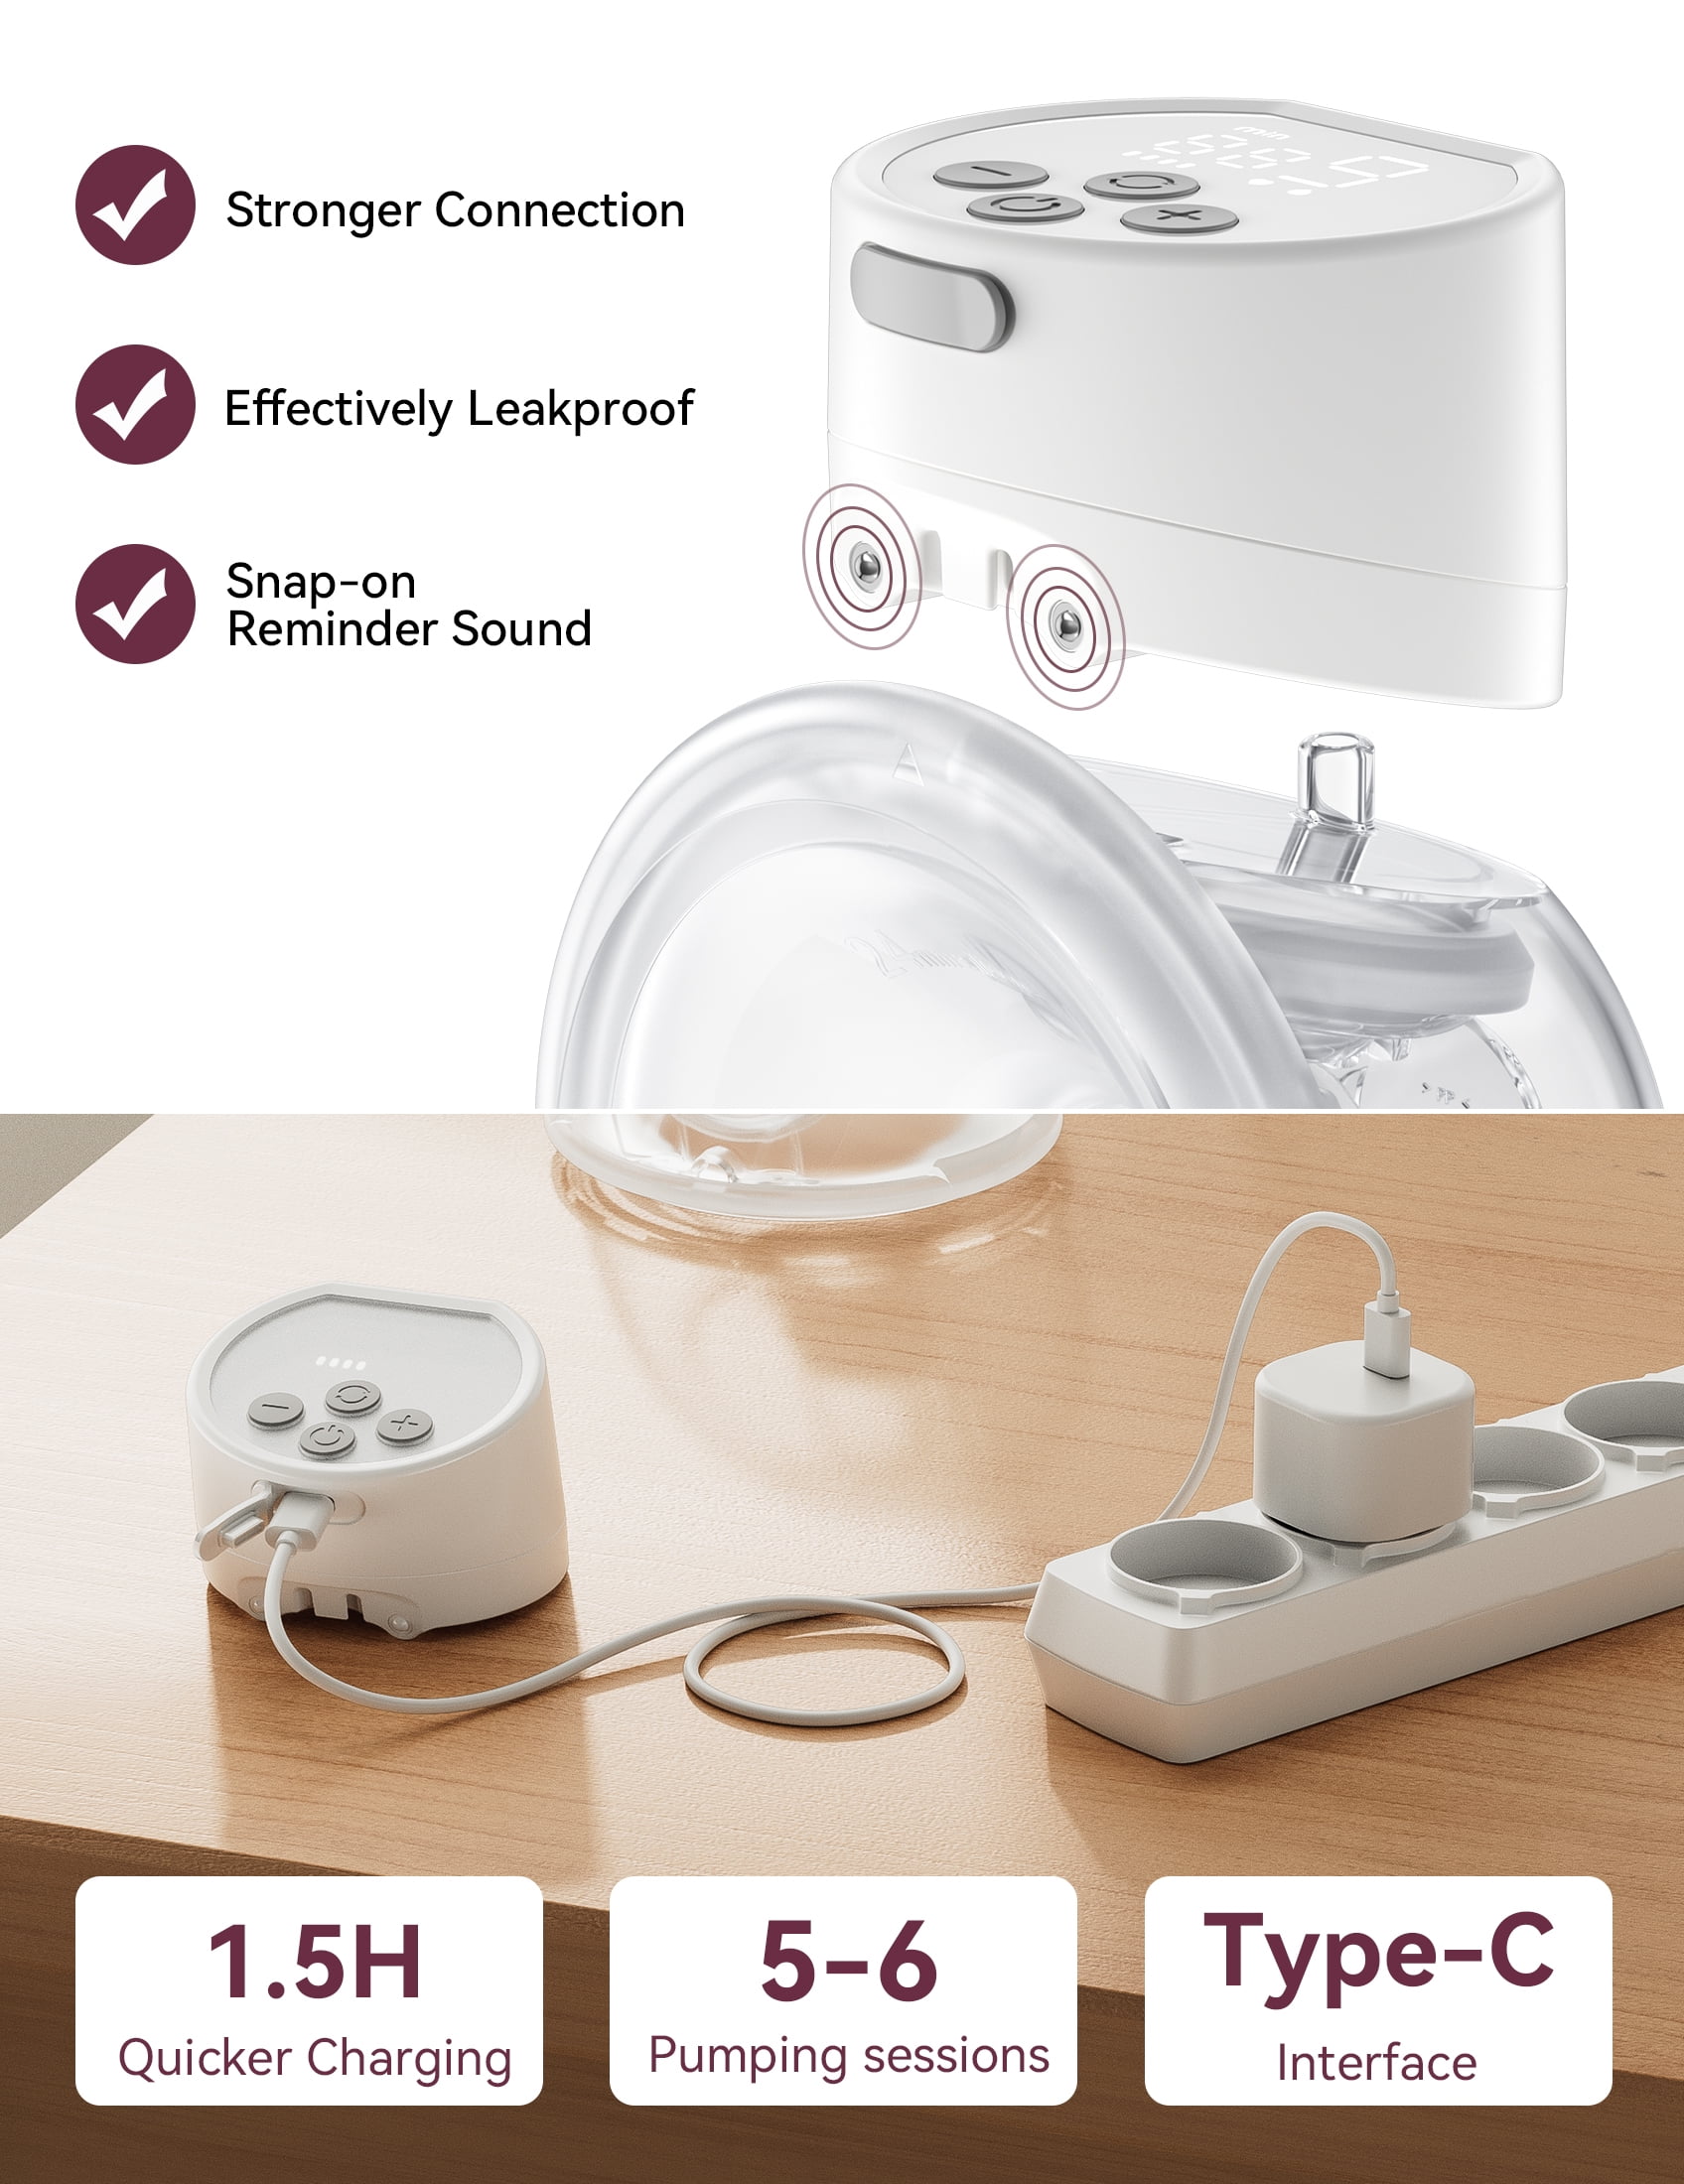 Momcozy S12 Pro Hands Free Breast Pump Wearable, Double Portable